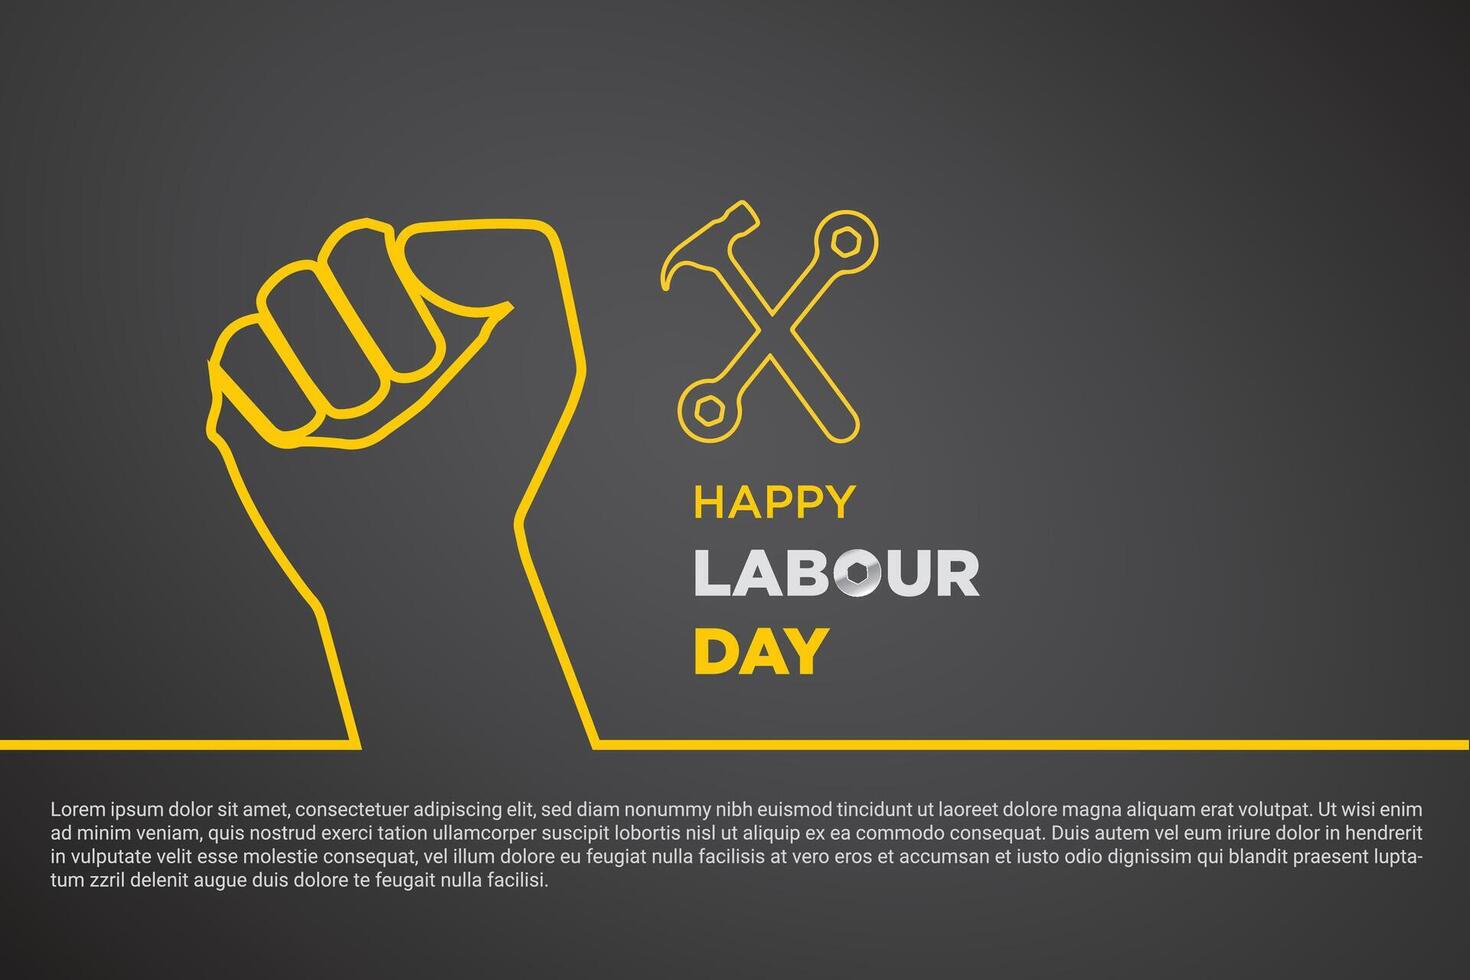 International workers day labour day may day template vector